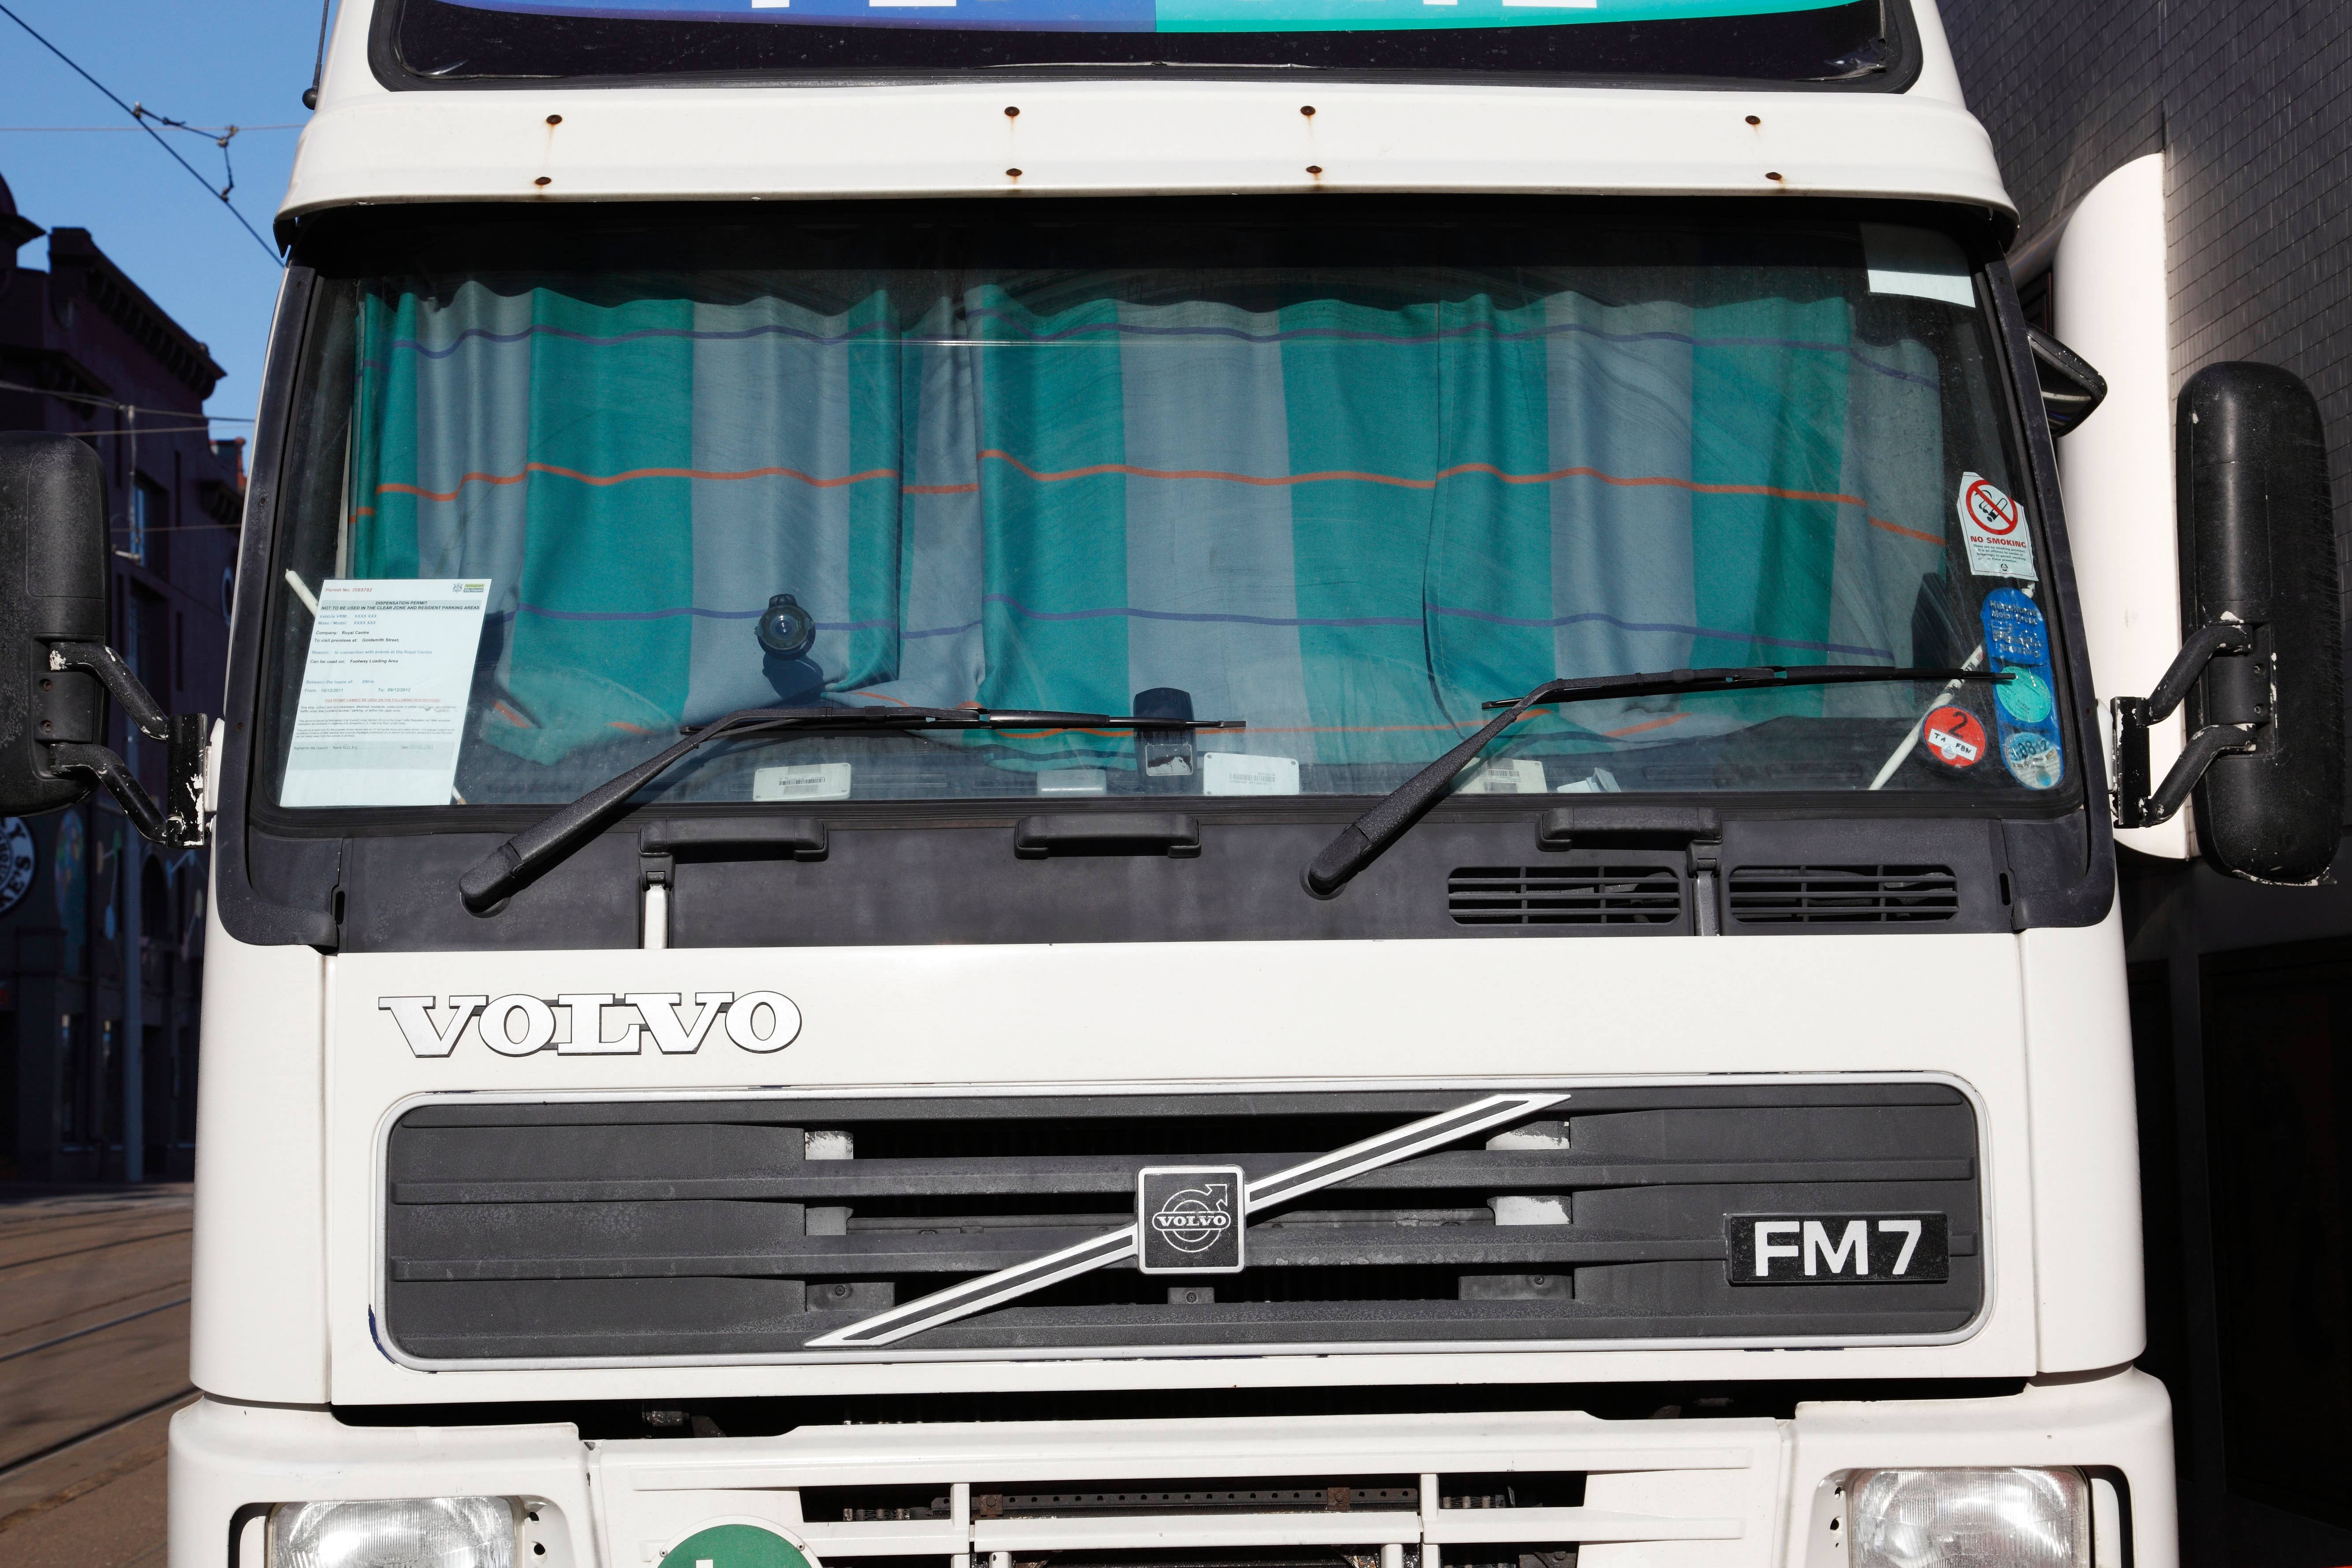 Each night thousands of lorry drivers are still being forced to park in laybys and industrial estates due to a severe shortage of purpose-built facilities, an investigation has found (Mark Richardson/Alamy/PA)